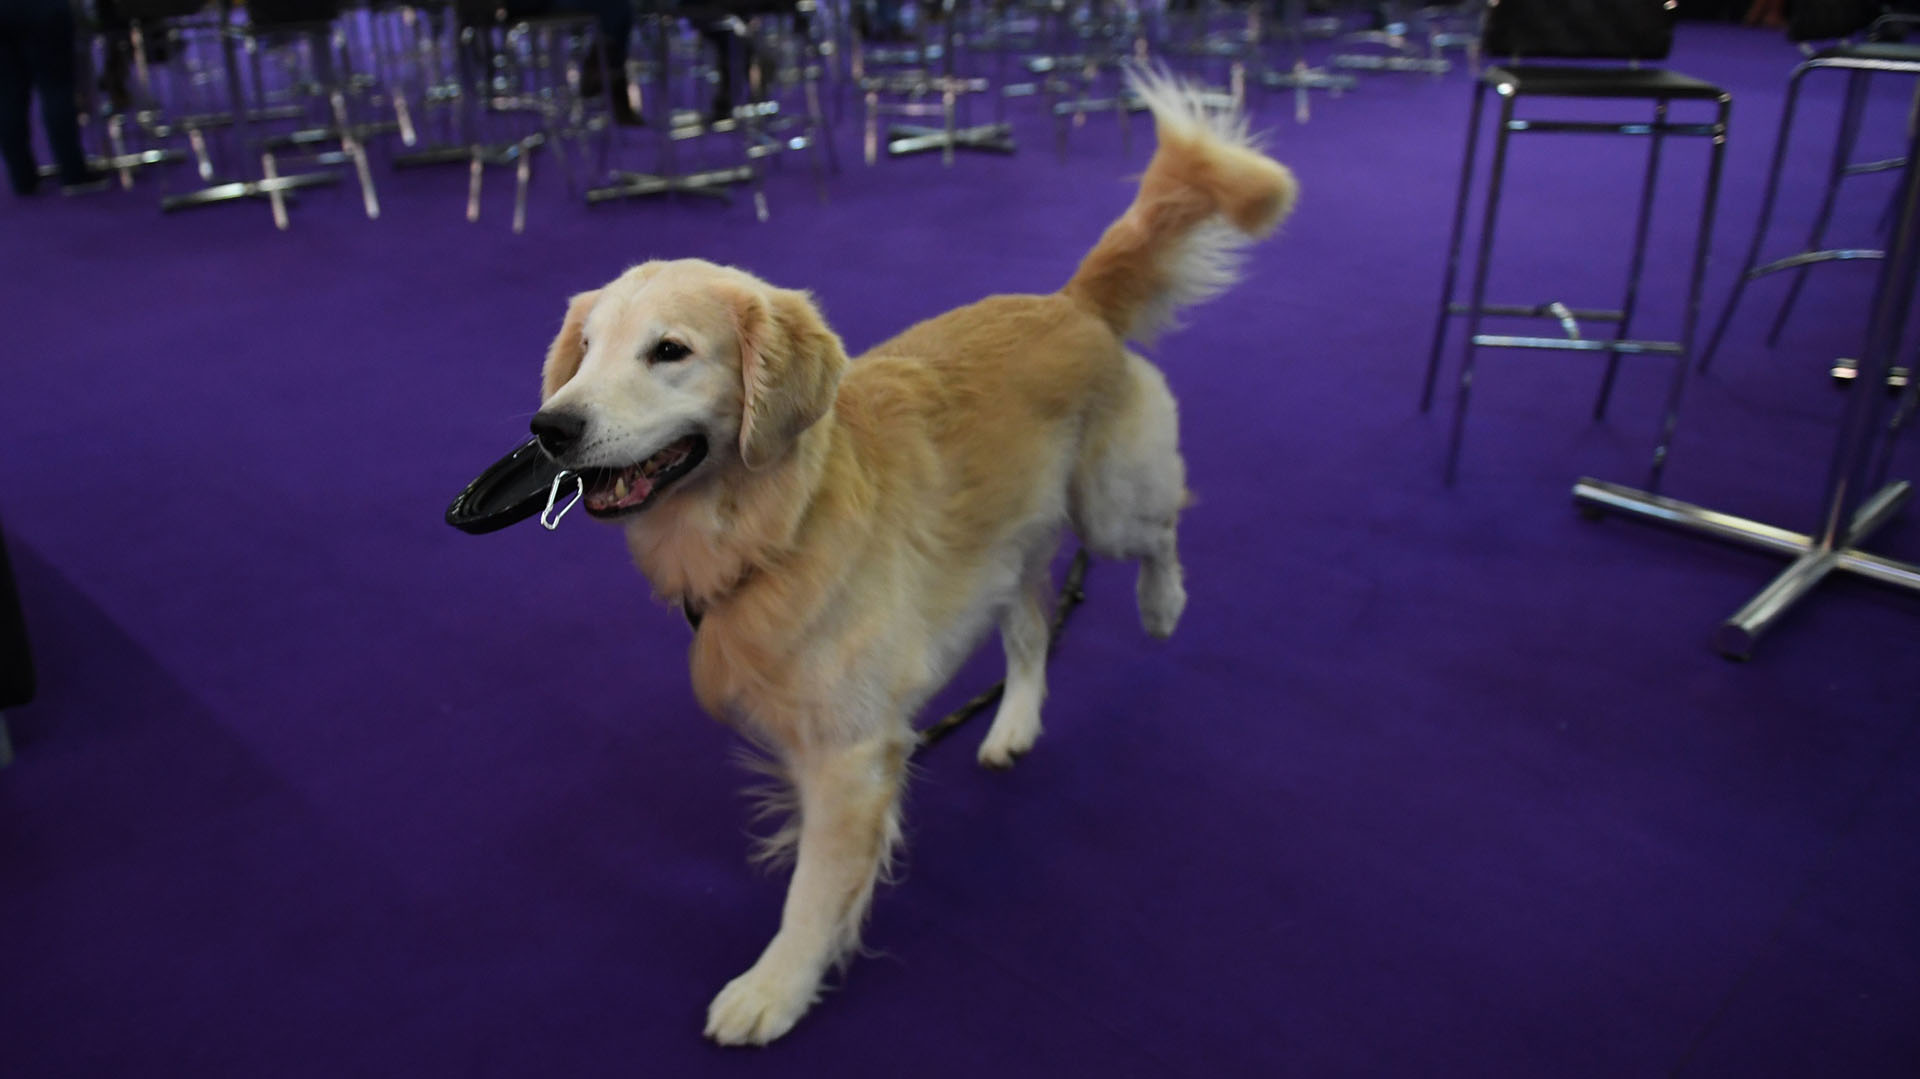 A Golden Retriever waits to competes in the 6th Annual Masters Agility Championship as the The American Kennel Club and Westminster Kennel Club present Meet & Compete on February 9, 2019, at Piers 92 and 94 in New York. (Photo by TIMOTHY A. CLARY / AFP)